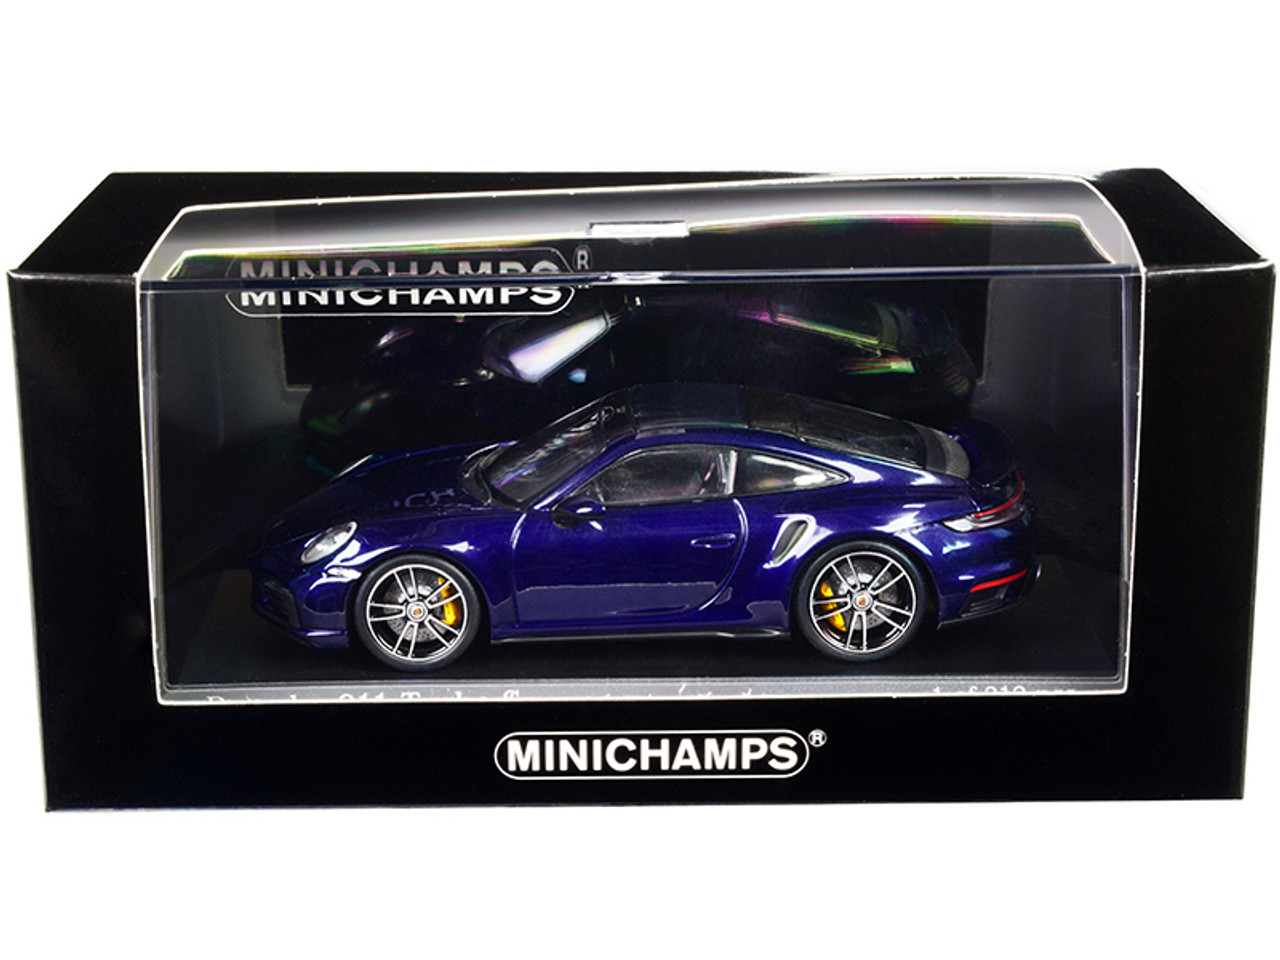 2020 Porsche 911 Turbo S Blue Metallic Limited Edition to 312 pieces Worldwide 1/43 Diecast Model Car by Minichamps